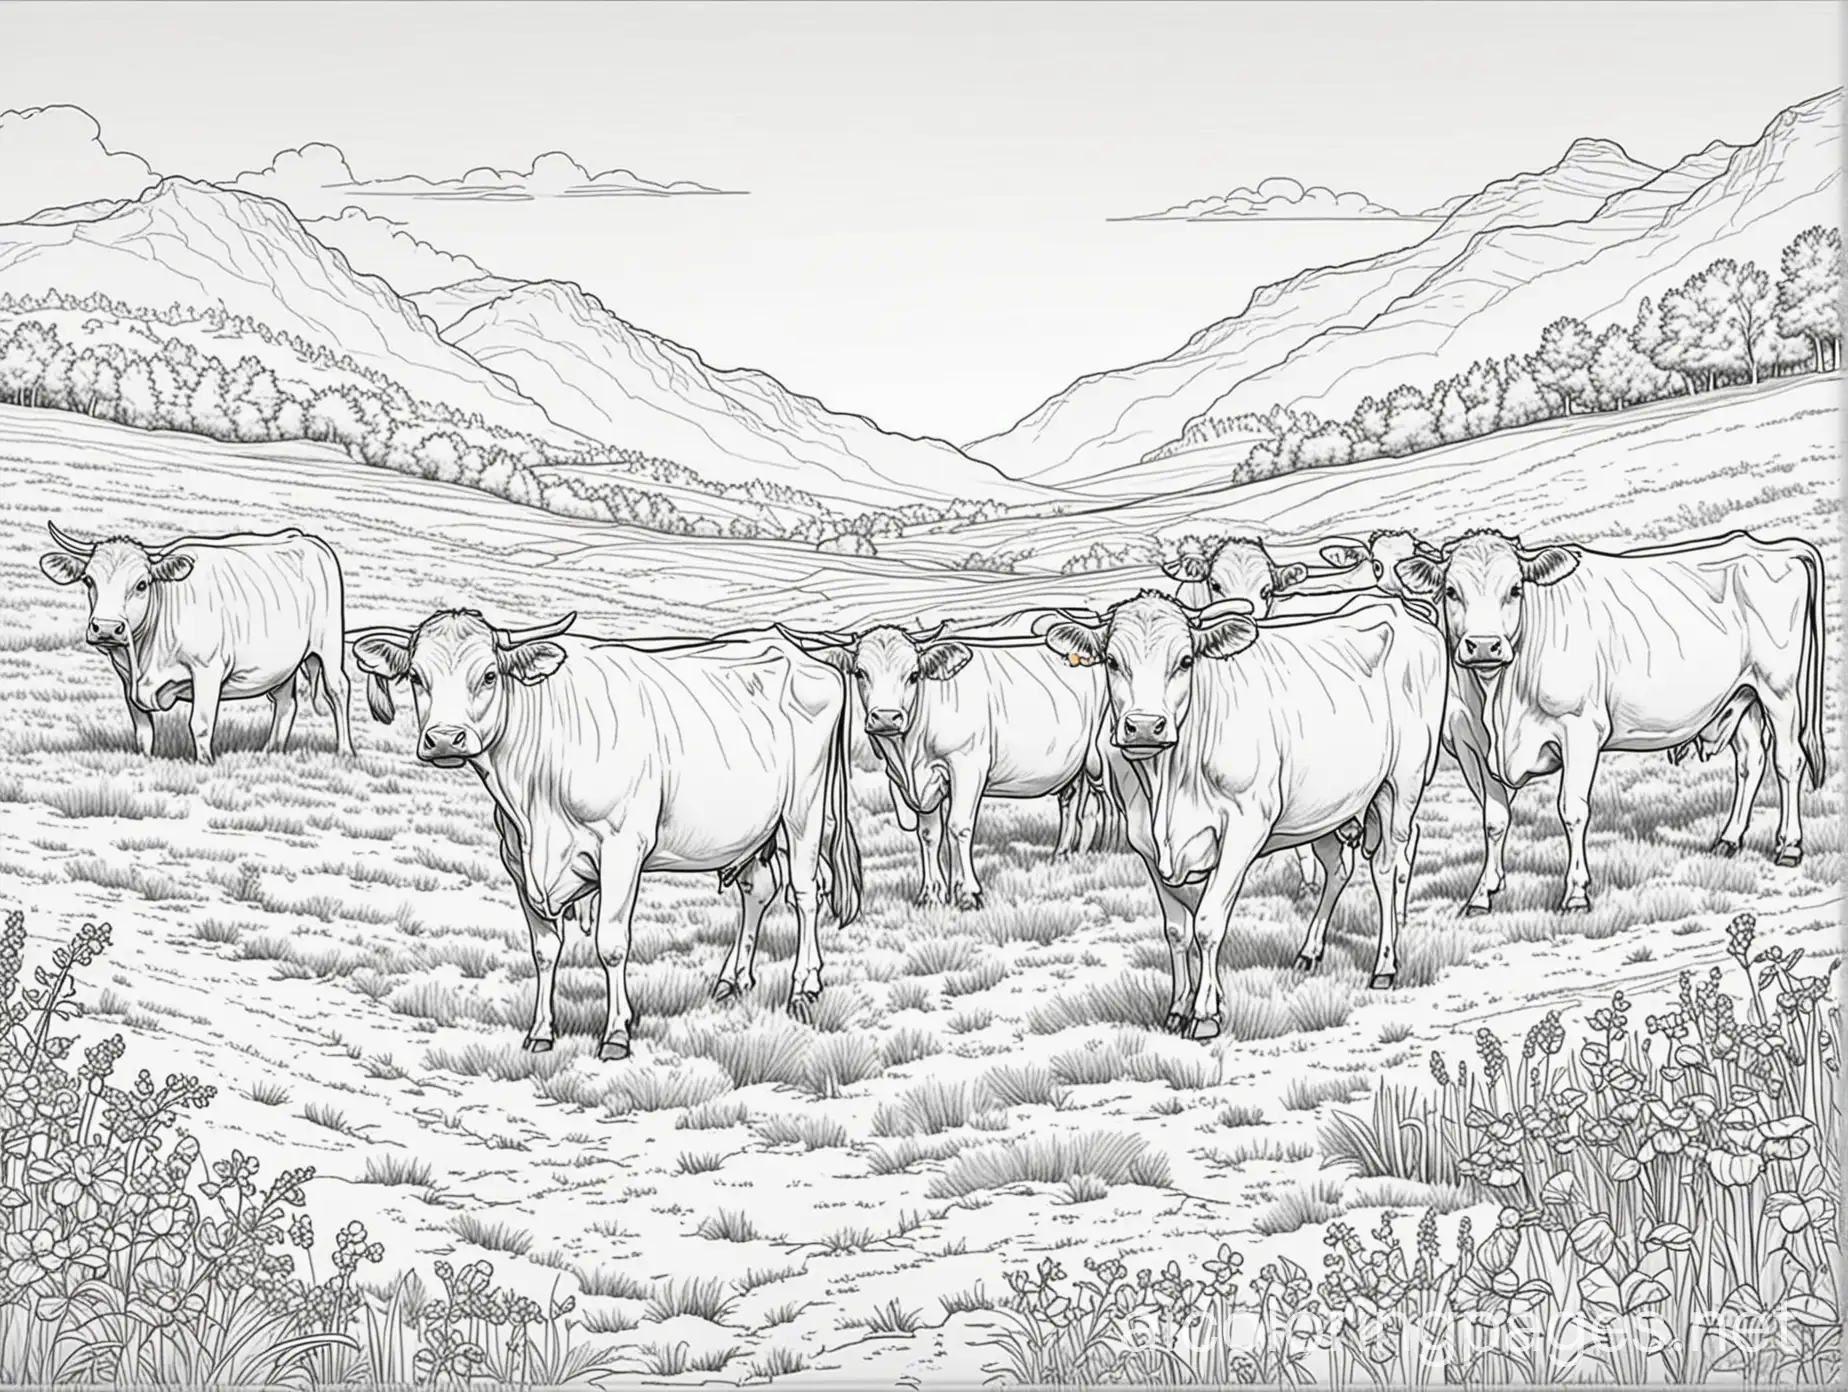 cows field landscape on one plan Coloring Page, black and white, line art, white background, Simplicity, Ample White Space. The background of the coloring page is plain white to make it easy for young children to color within the lines. The outlines of all the subjects are easy to distinguish, making it simple for kids to color without too much difficulty, Coloring Page, black and white, line art, white background, Simplicity, Ample White Space. The background of the coloring page is plain white to make it easy for young children to color within the lines. The outlines of all the subjects are easy to distinguish, making it simple for kids to color without too much difficulty